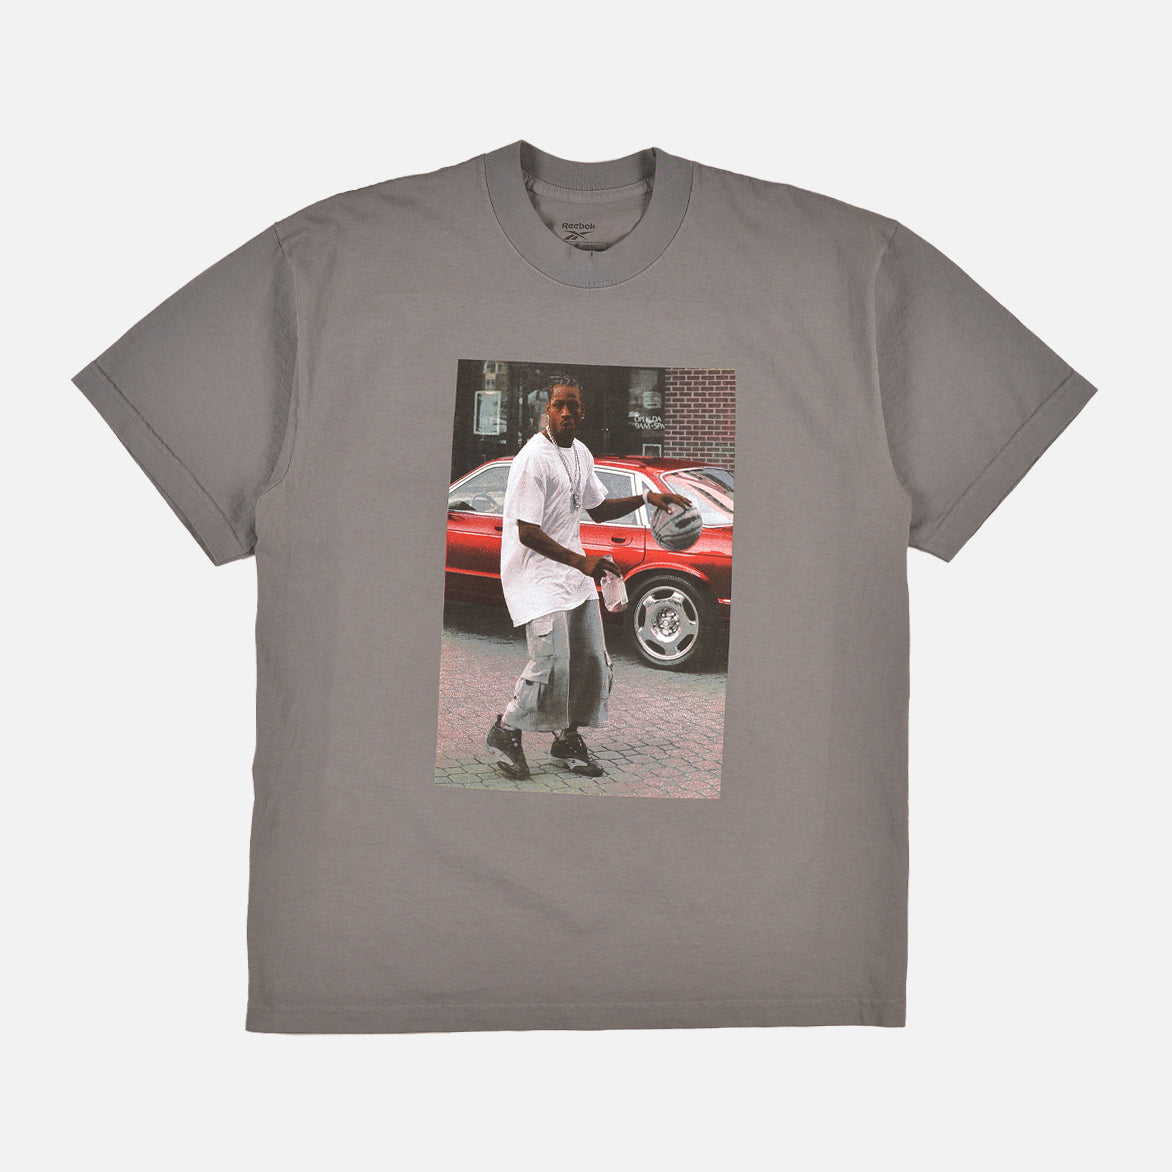 ALLEN IVERSON "BALL IN HAND" TEE - CHARCOAL